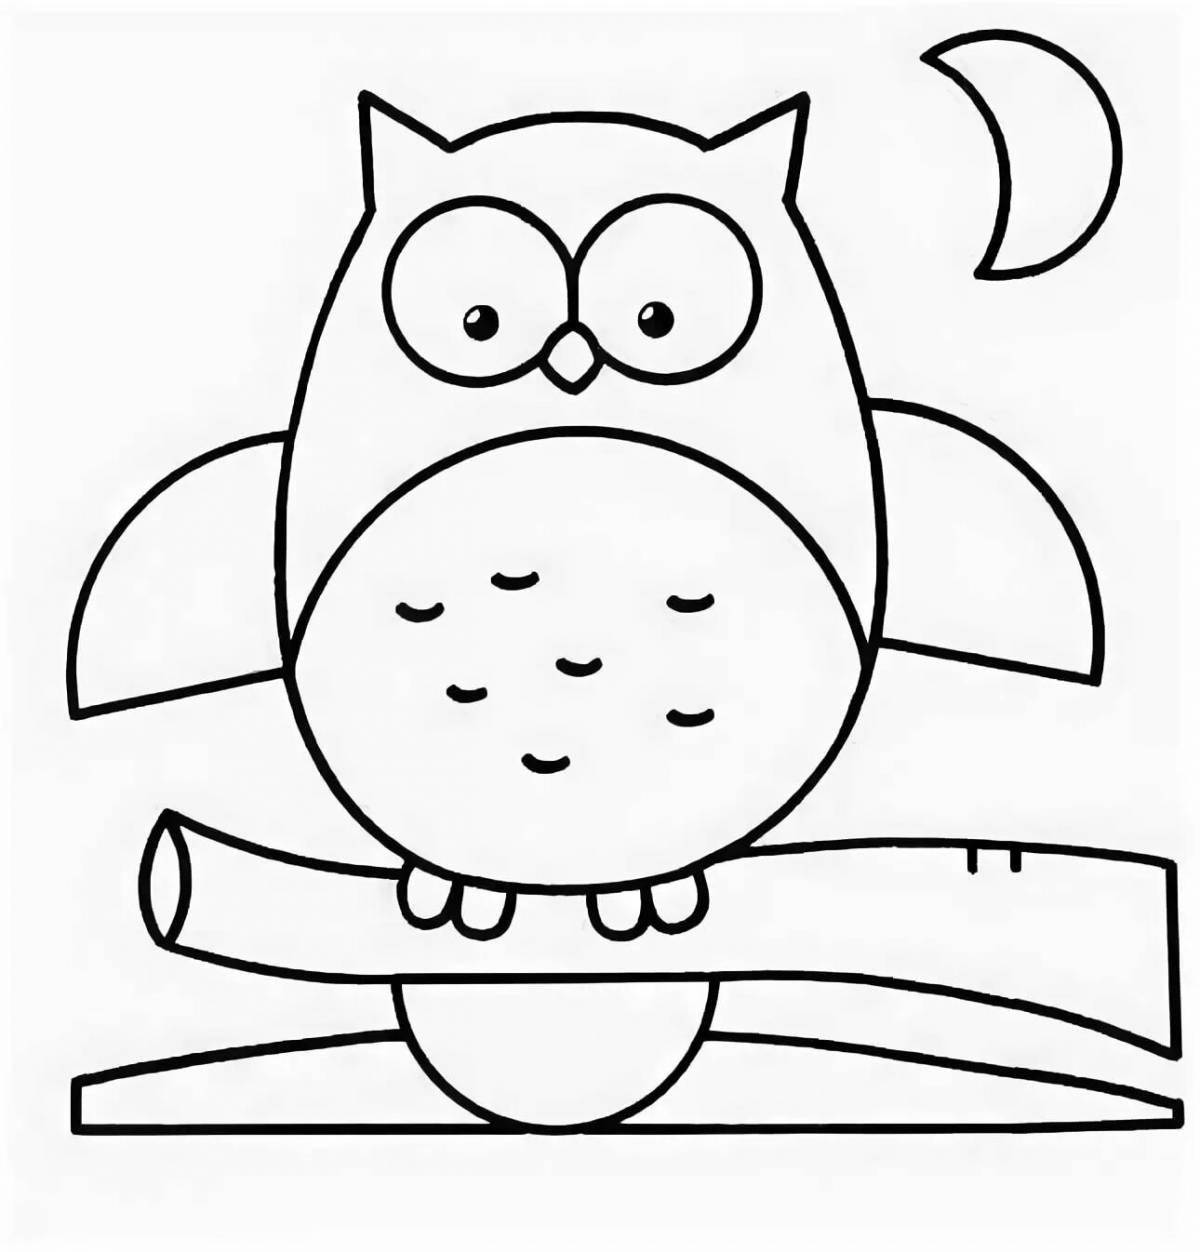 Exquisite simple drawing coloring book